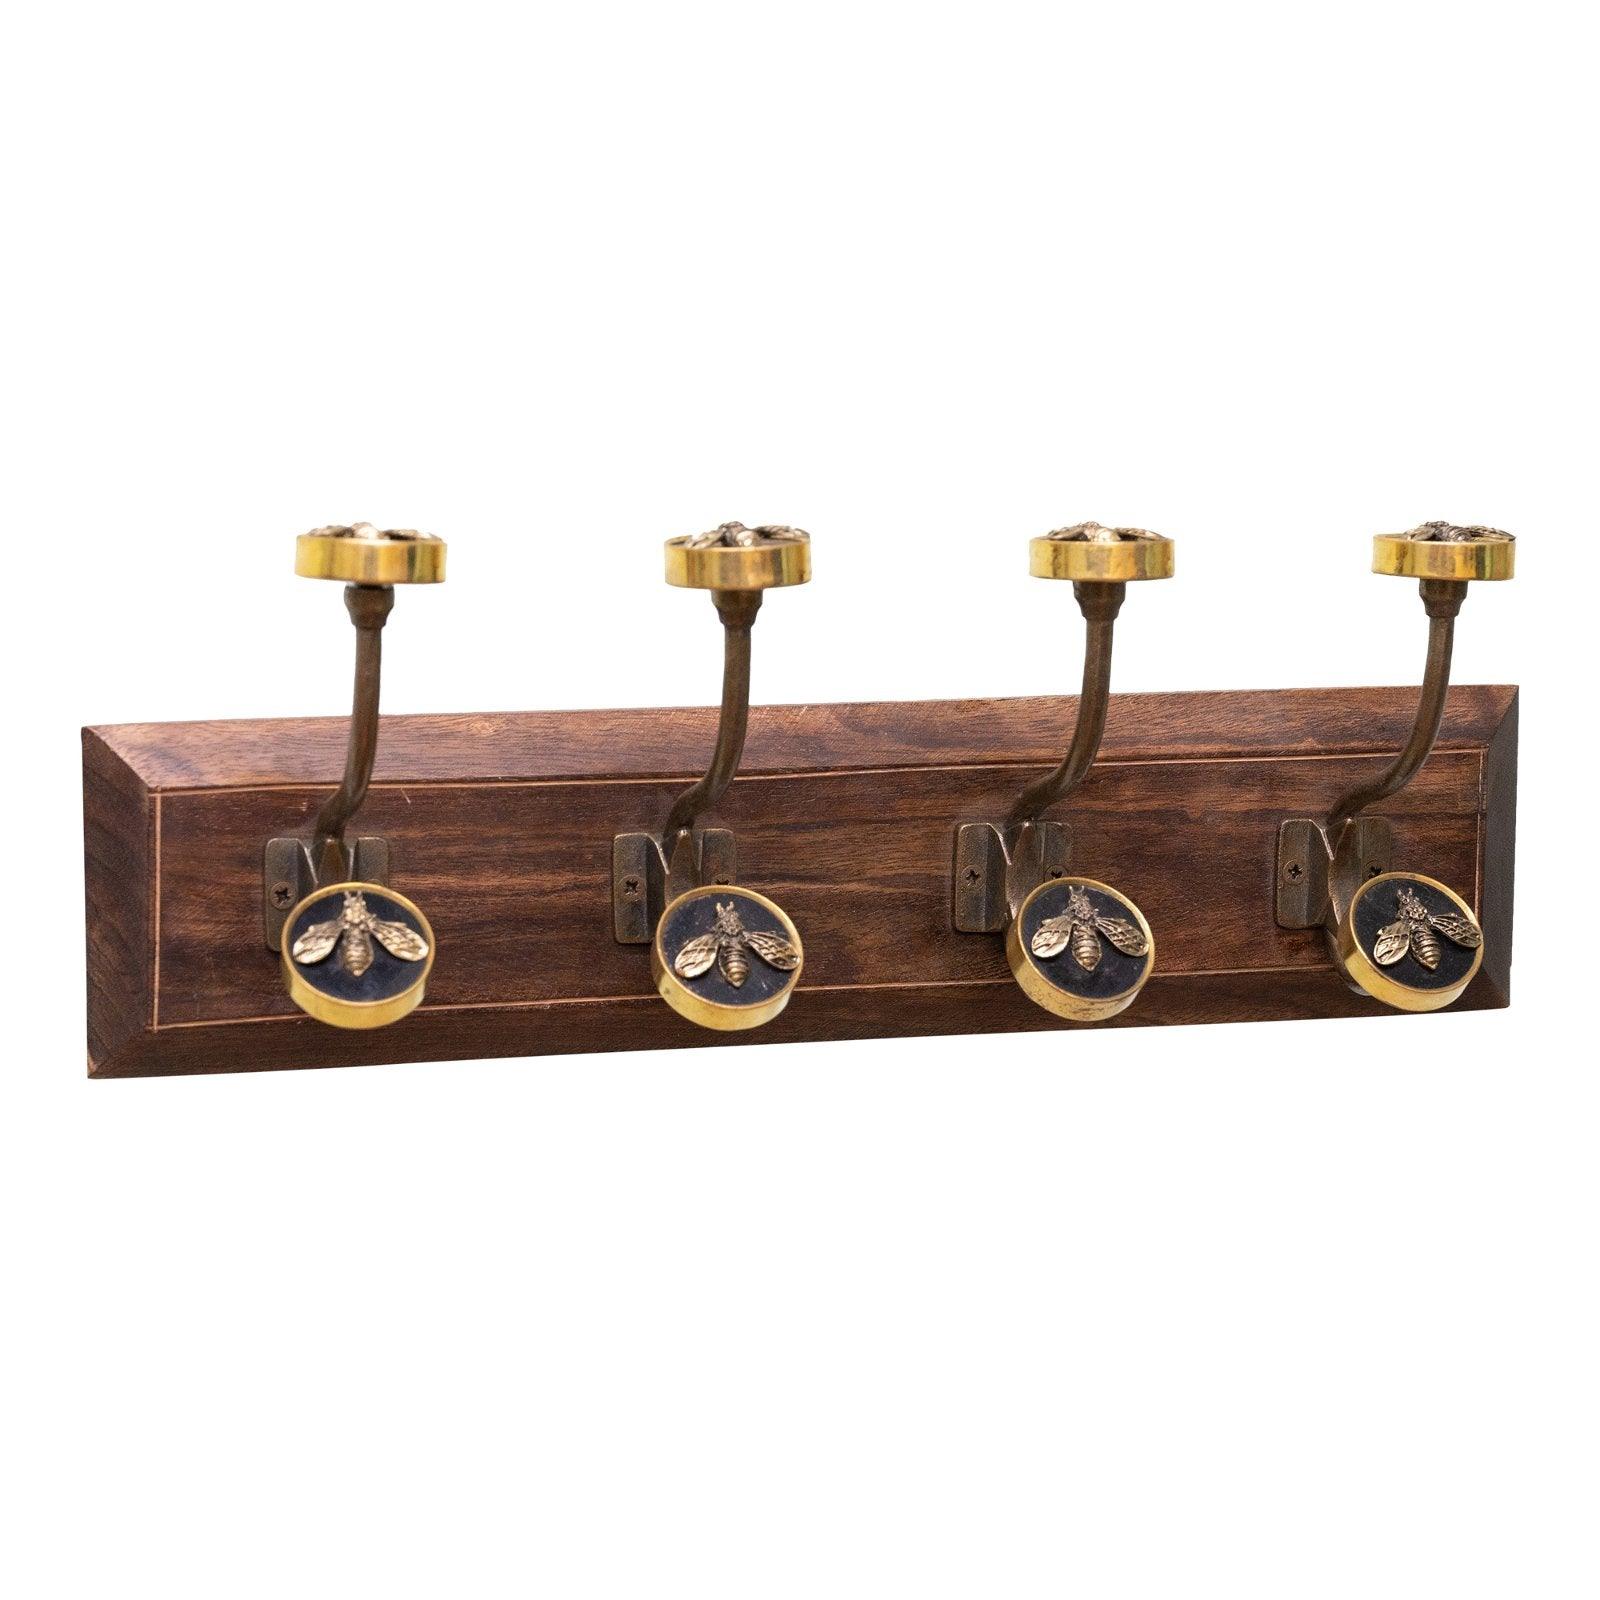 View Four Bee Design Double Hooks on Wooden Base information